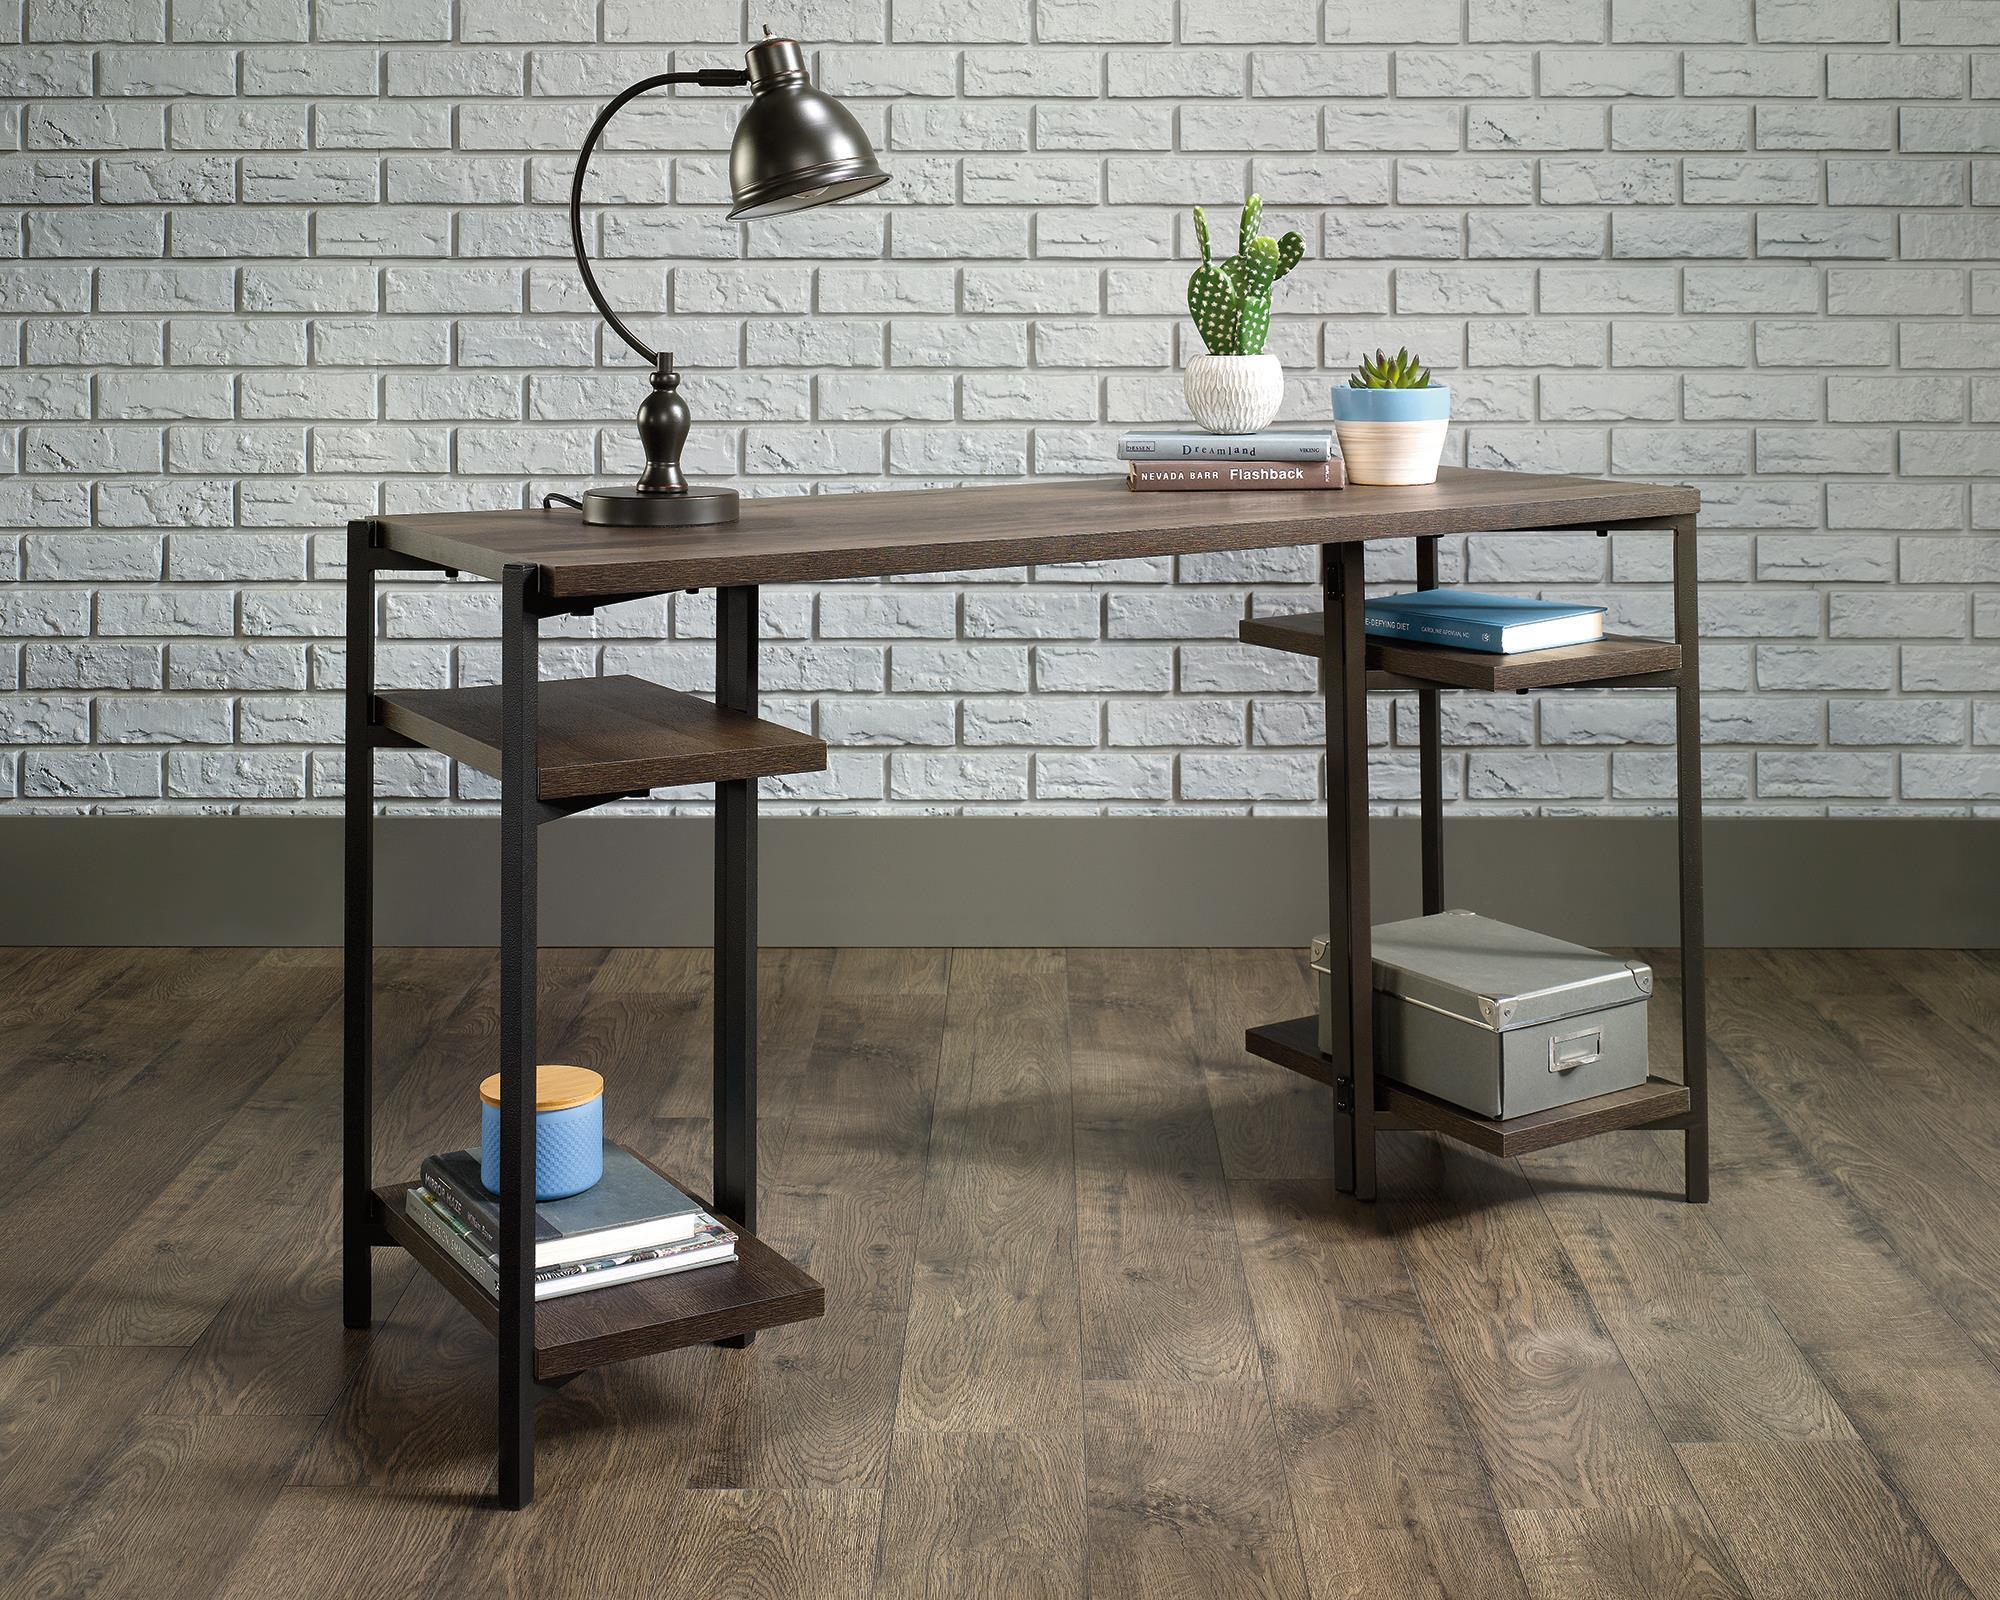 Chunky industrial bench desk smoked oak - image 1